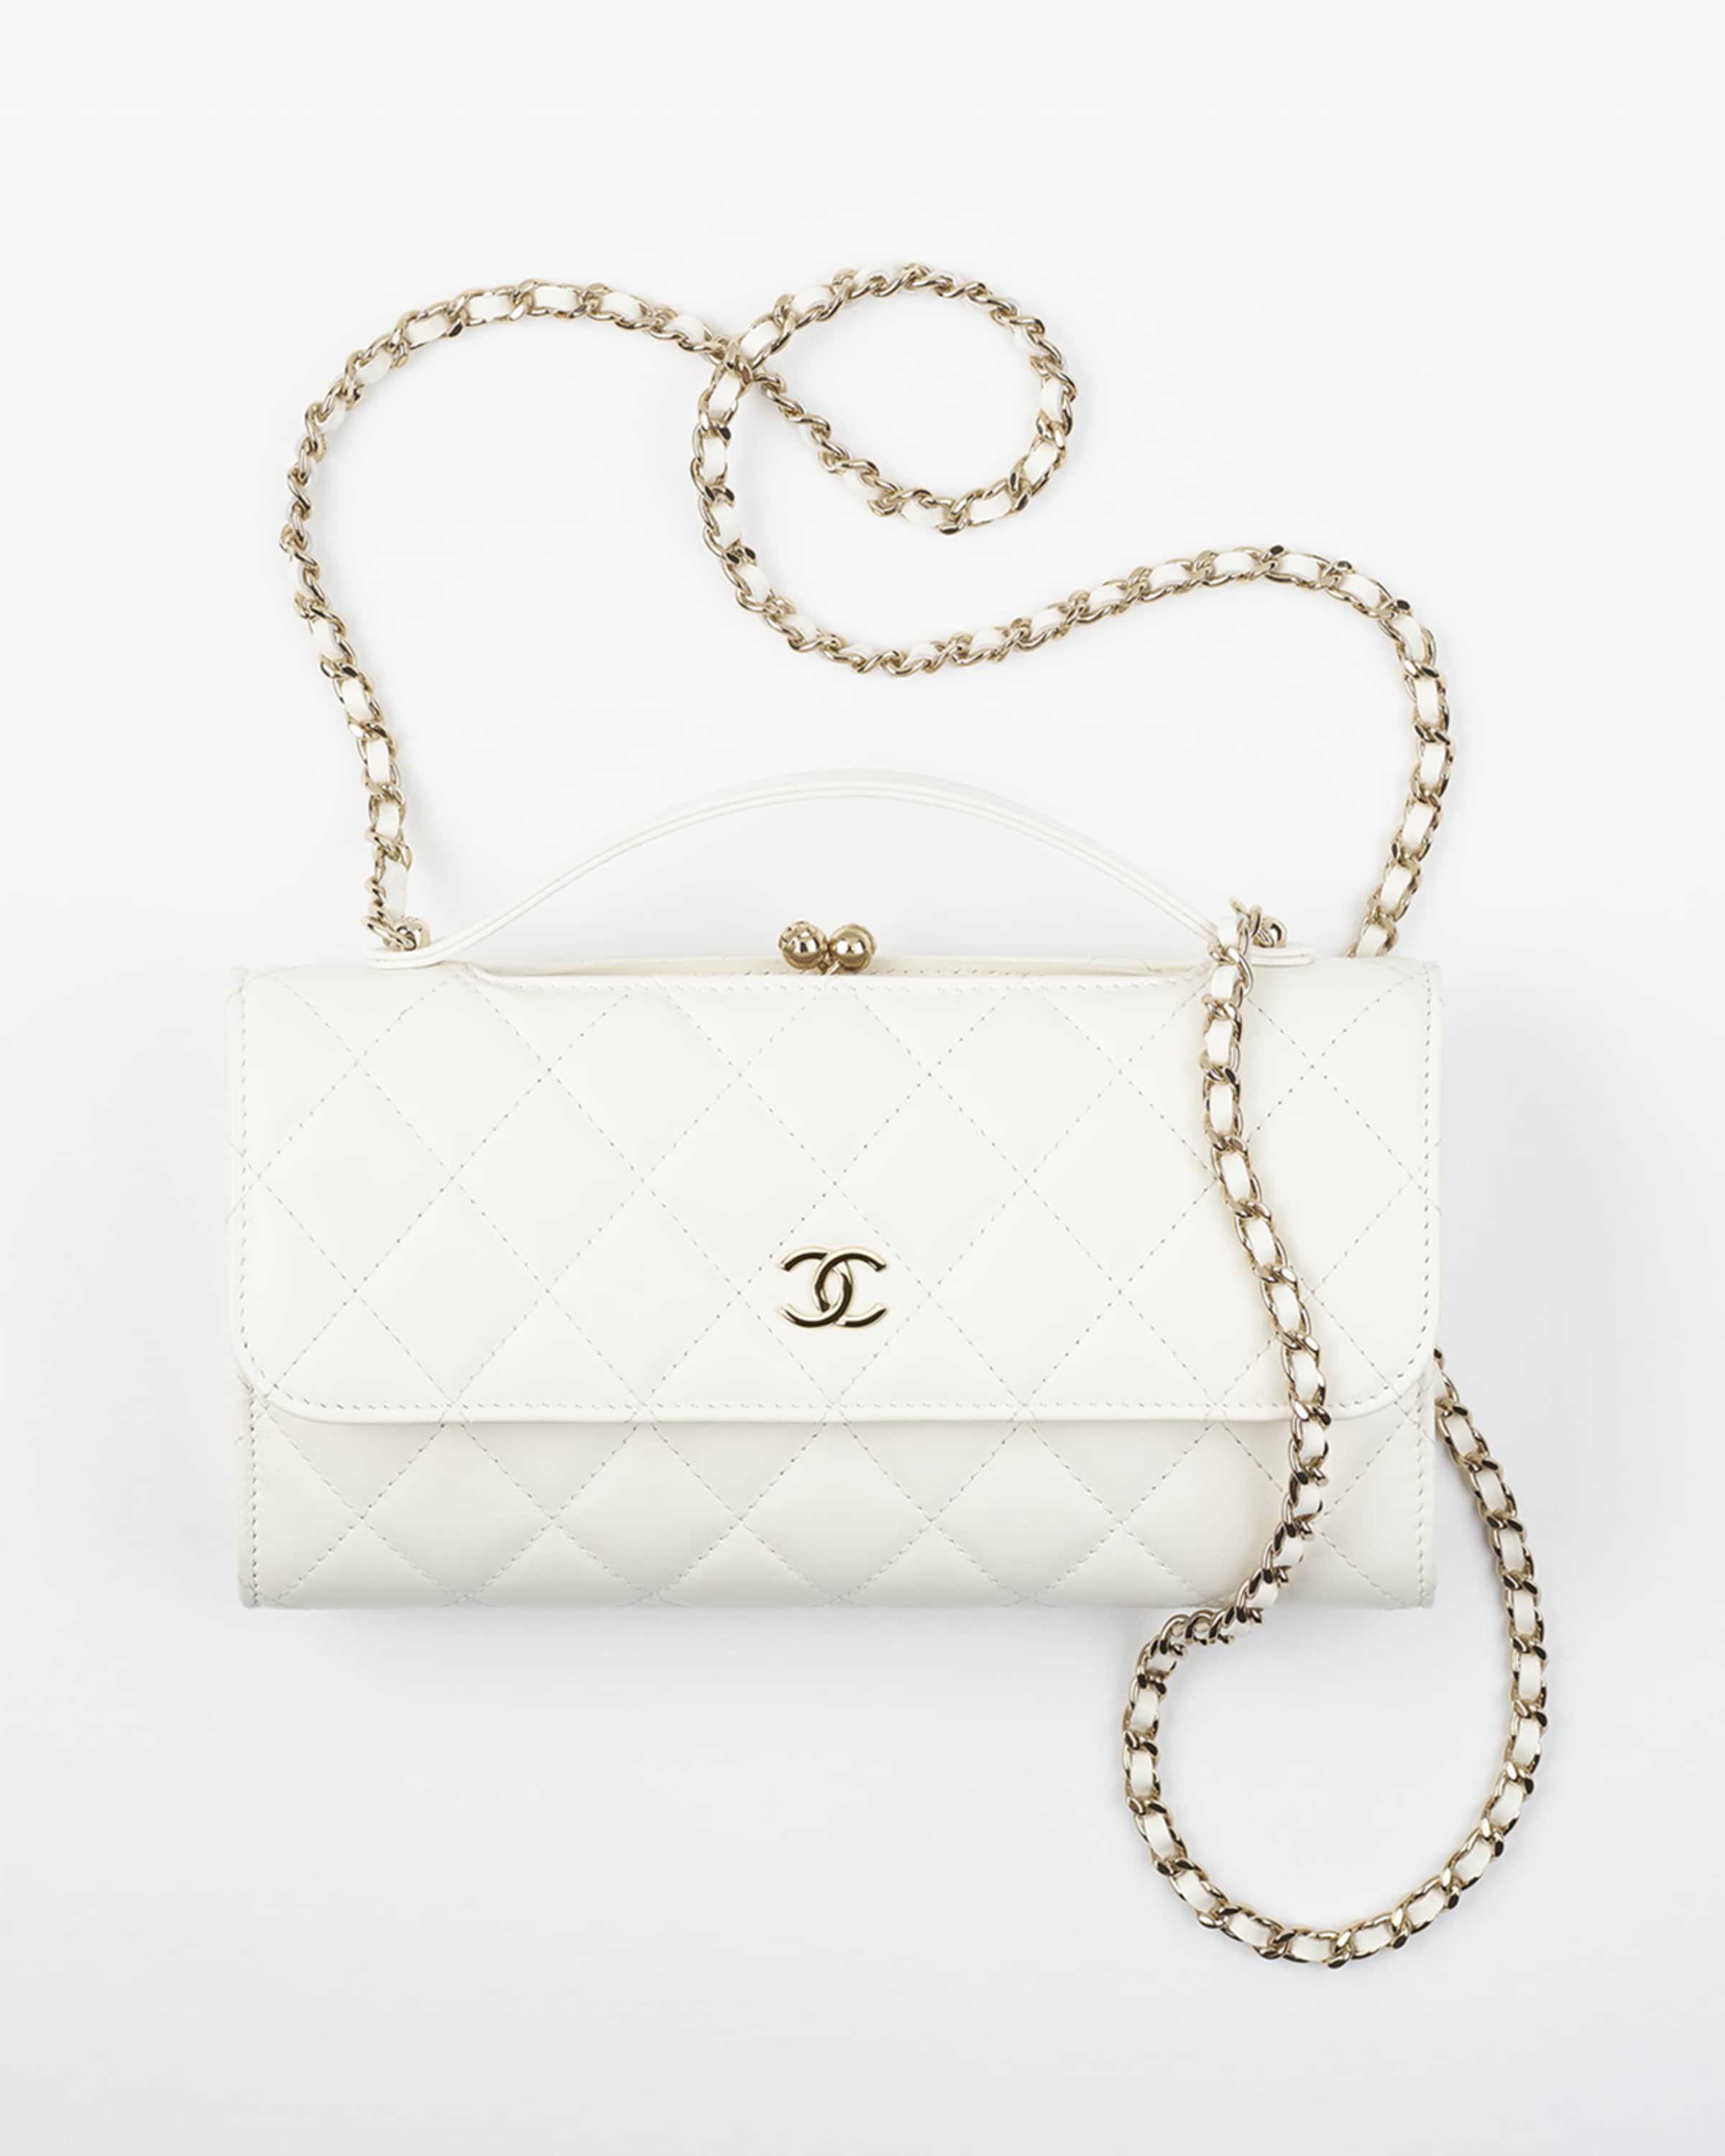 CHANEL FLAP PHONE HOLDER WITH CHAIN | Neiman Marcus